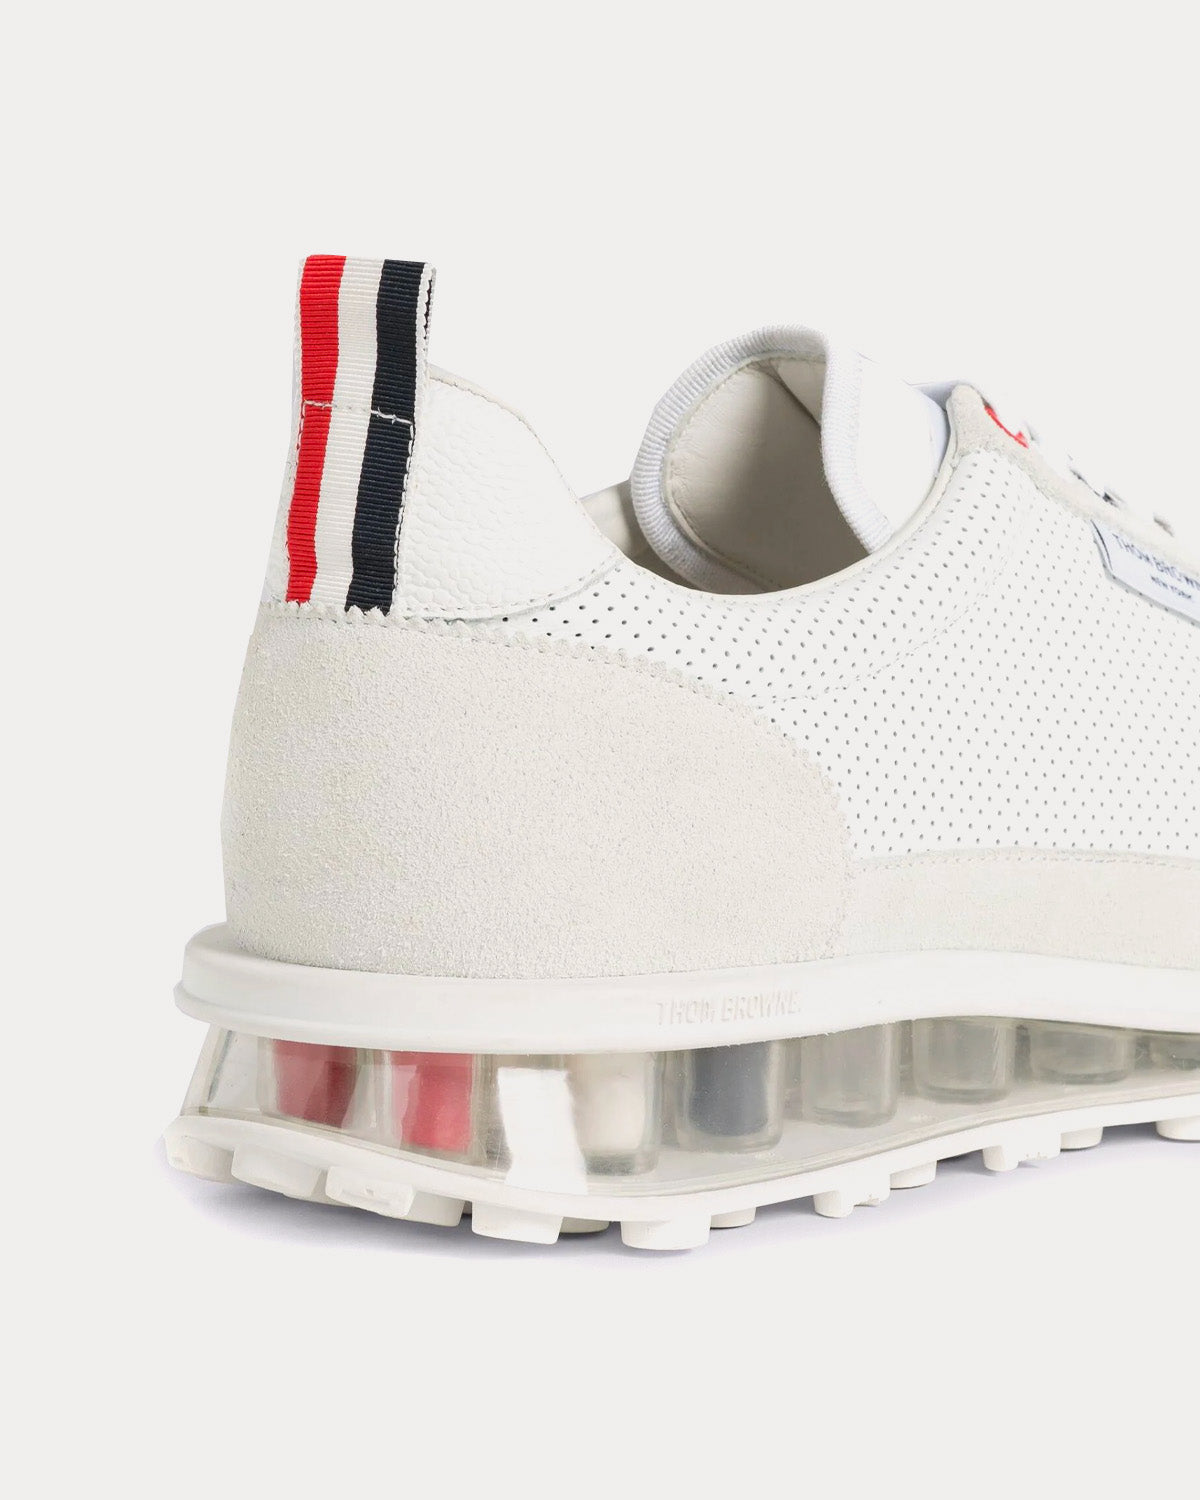 Thom Browne - Tech Runner Clear Sole White / Beige Low Top Sneakers